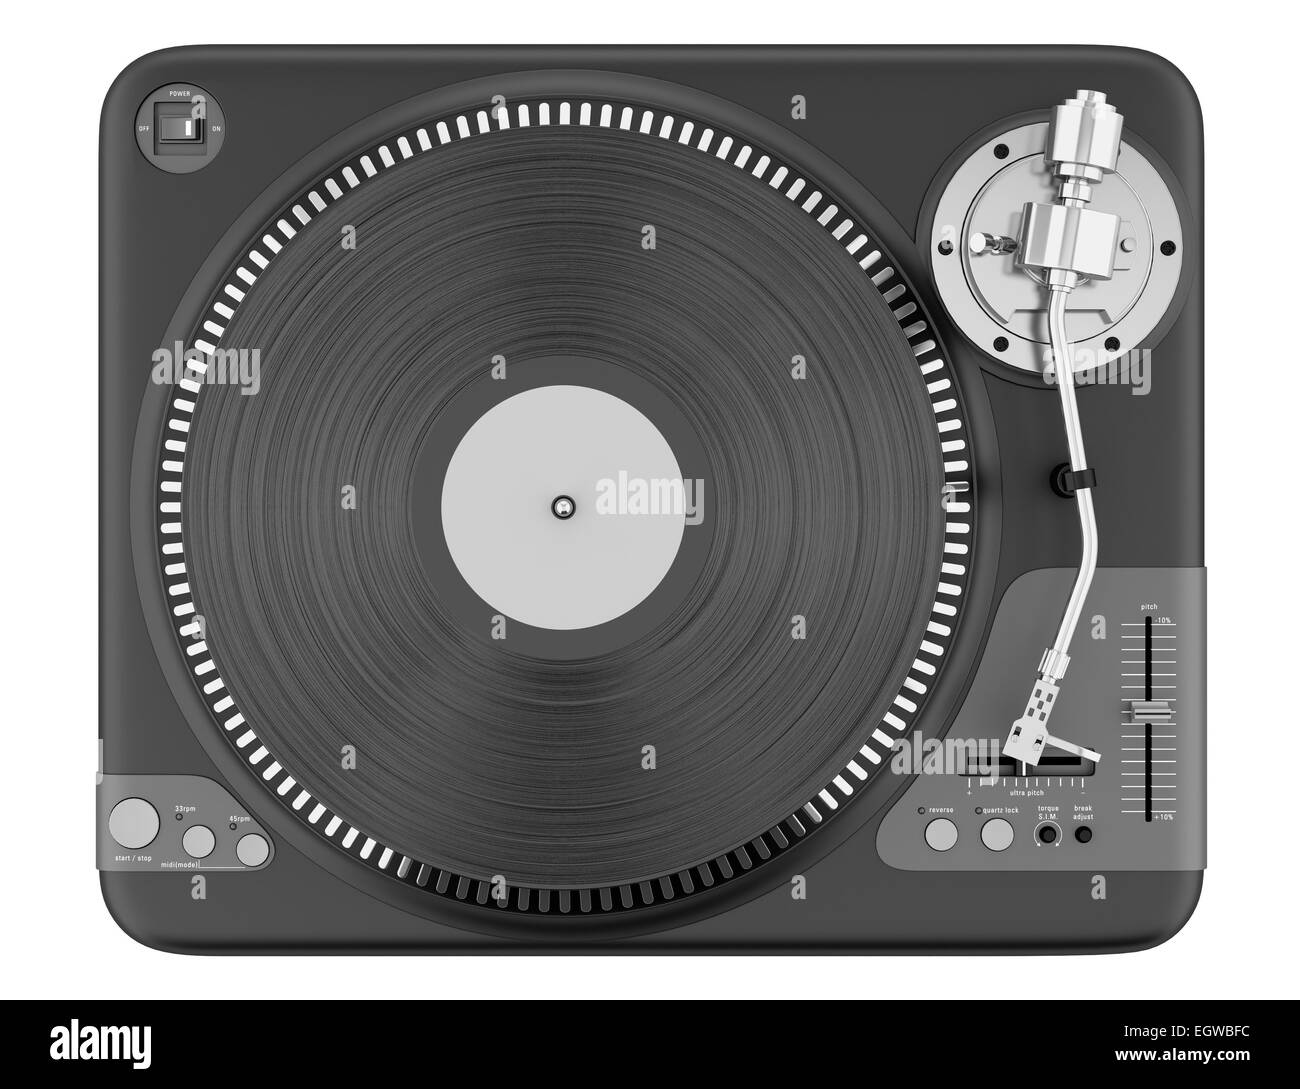 top view of black turntable isolated on white background Stock Photo